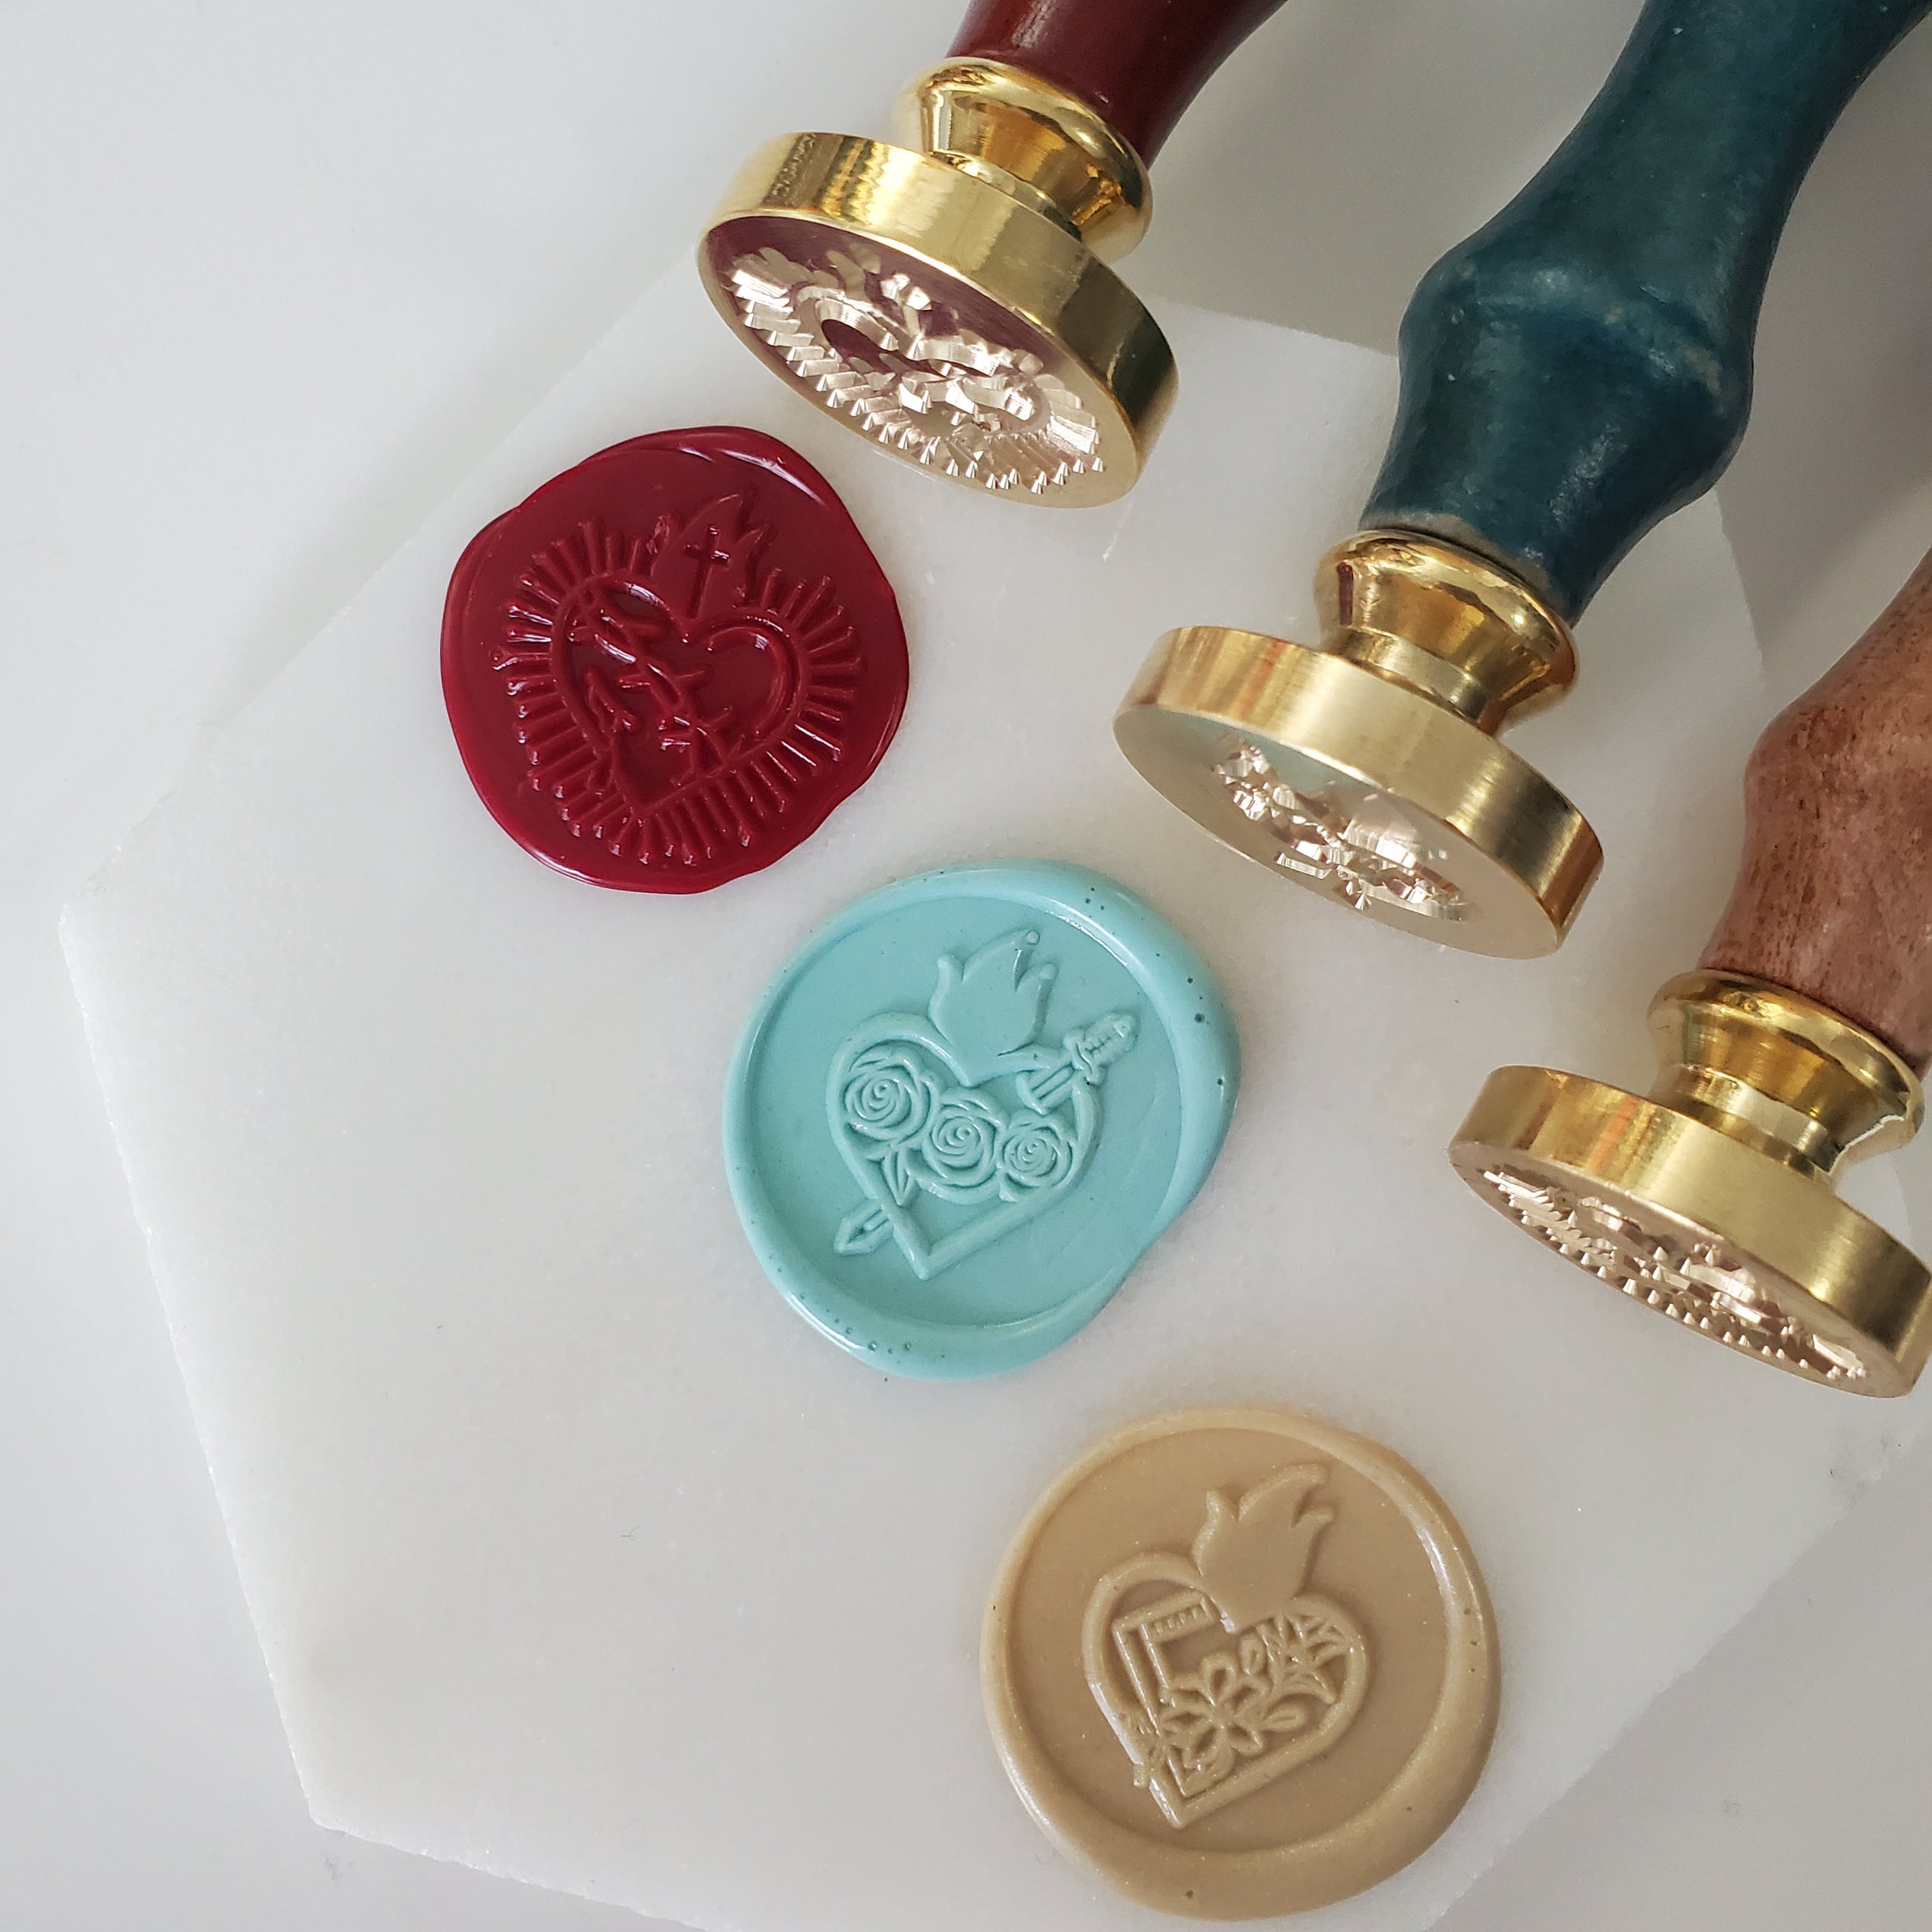 Catholic Wax Seal Stamps, Sacred Heart of Jesus & Immaculate Heart of Mary,  Engraved in the USA